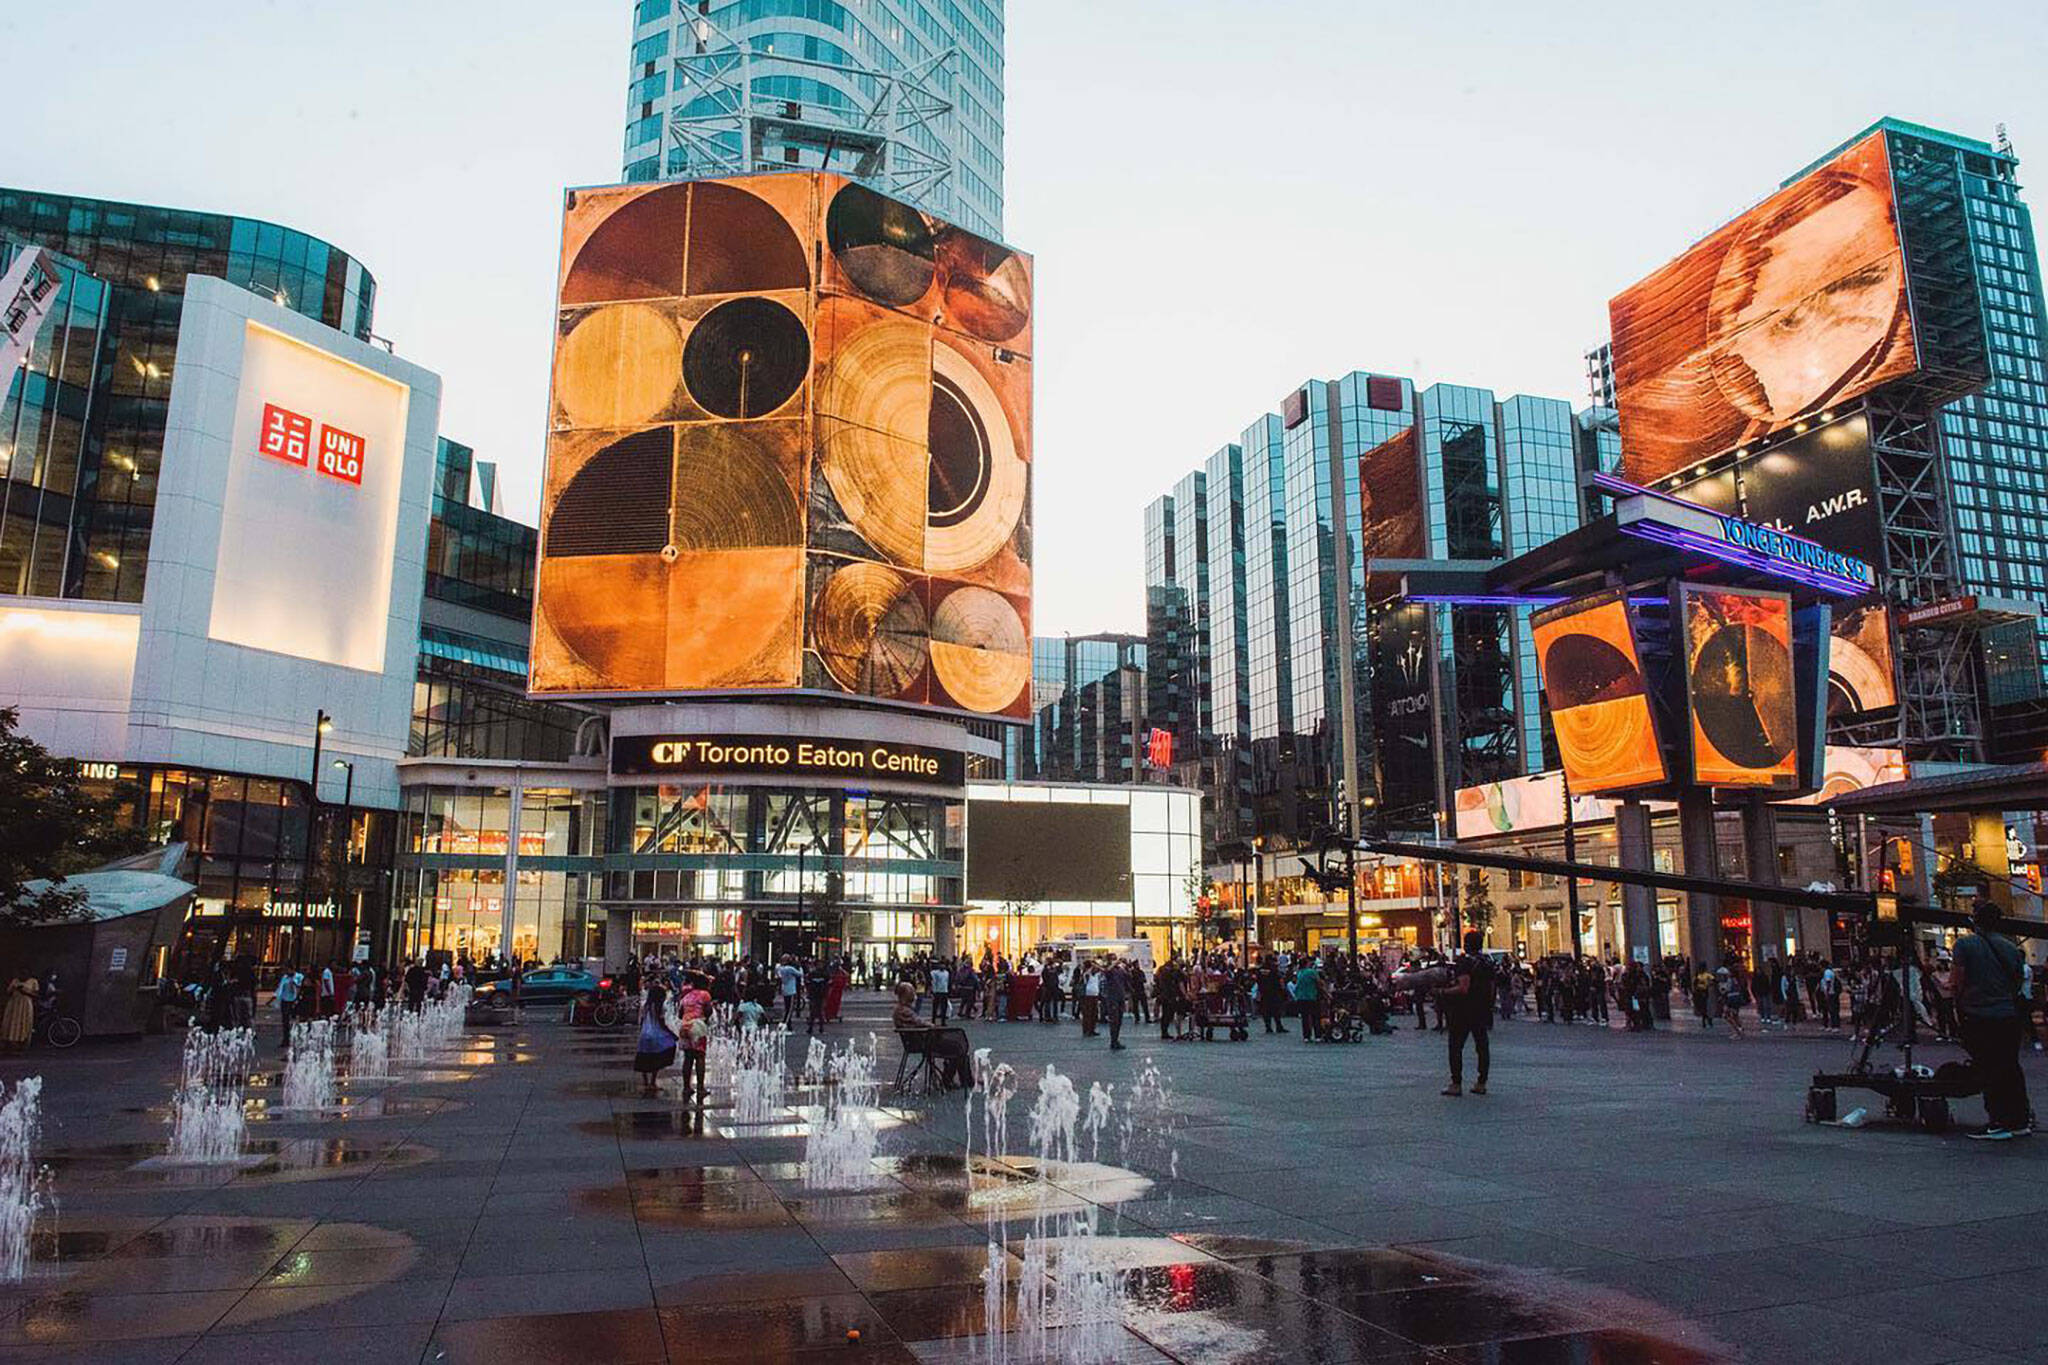 Things to Do in Toronto - Eaton Centre